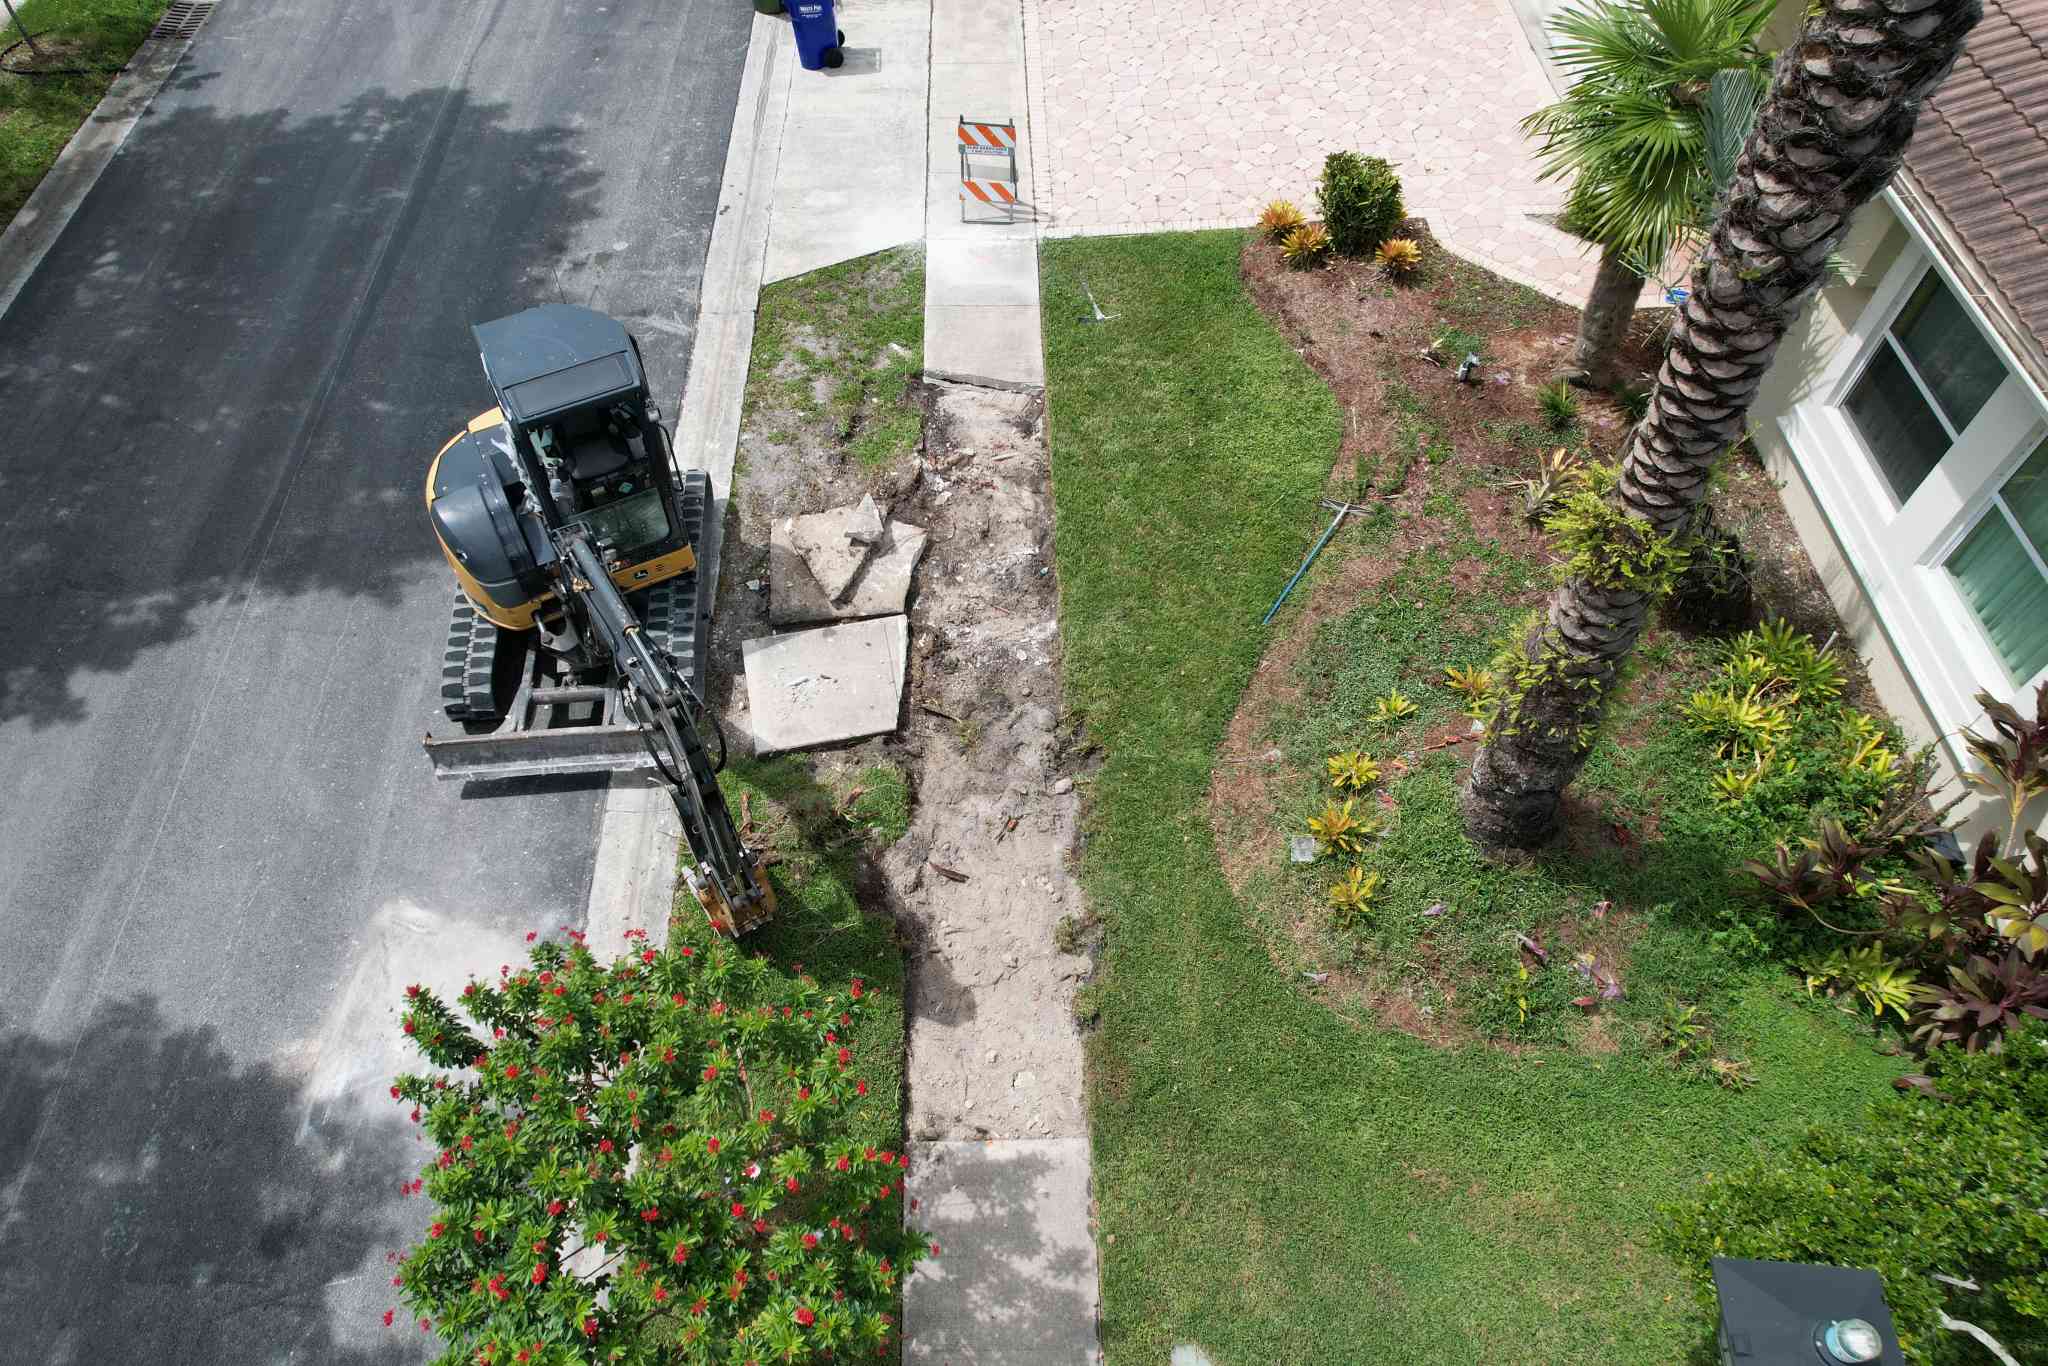 Concrete contractor 3-D Paving excavates an old sidewalk damaged by tree roots.